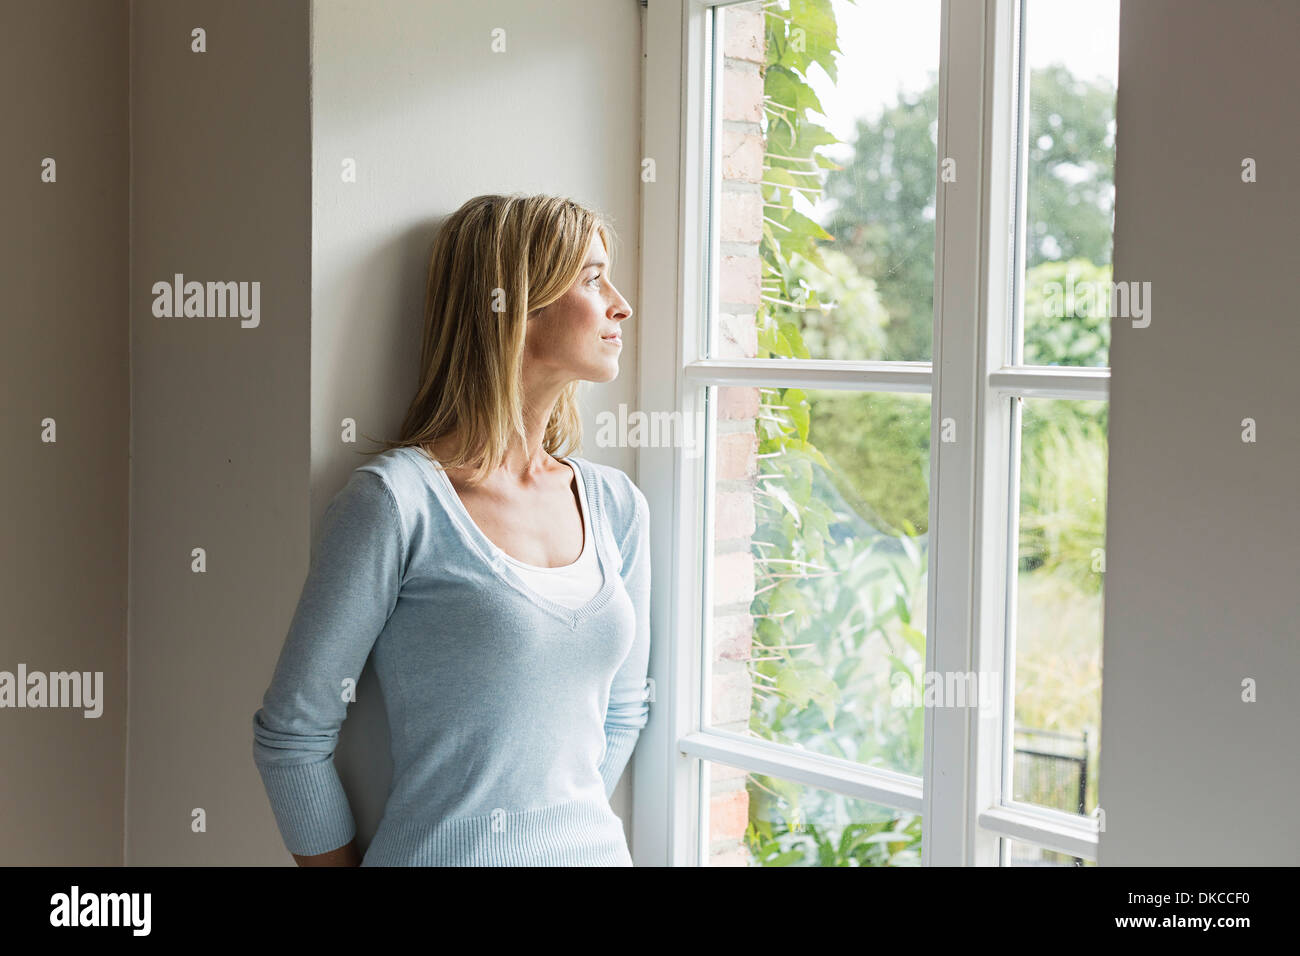 Portrait of mid adult woman looking out of window Stock Photo